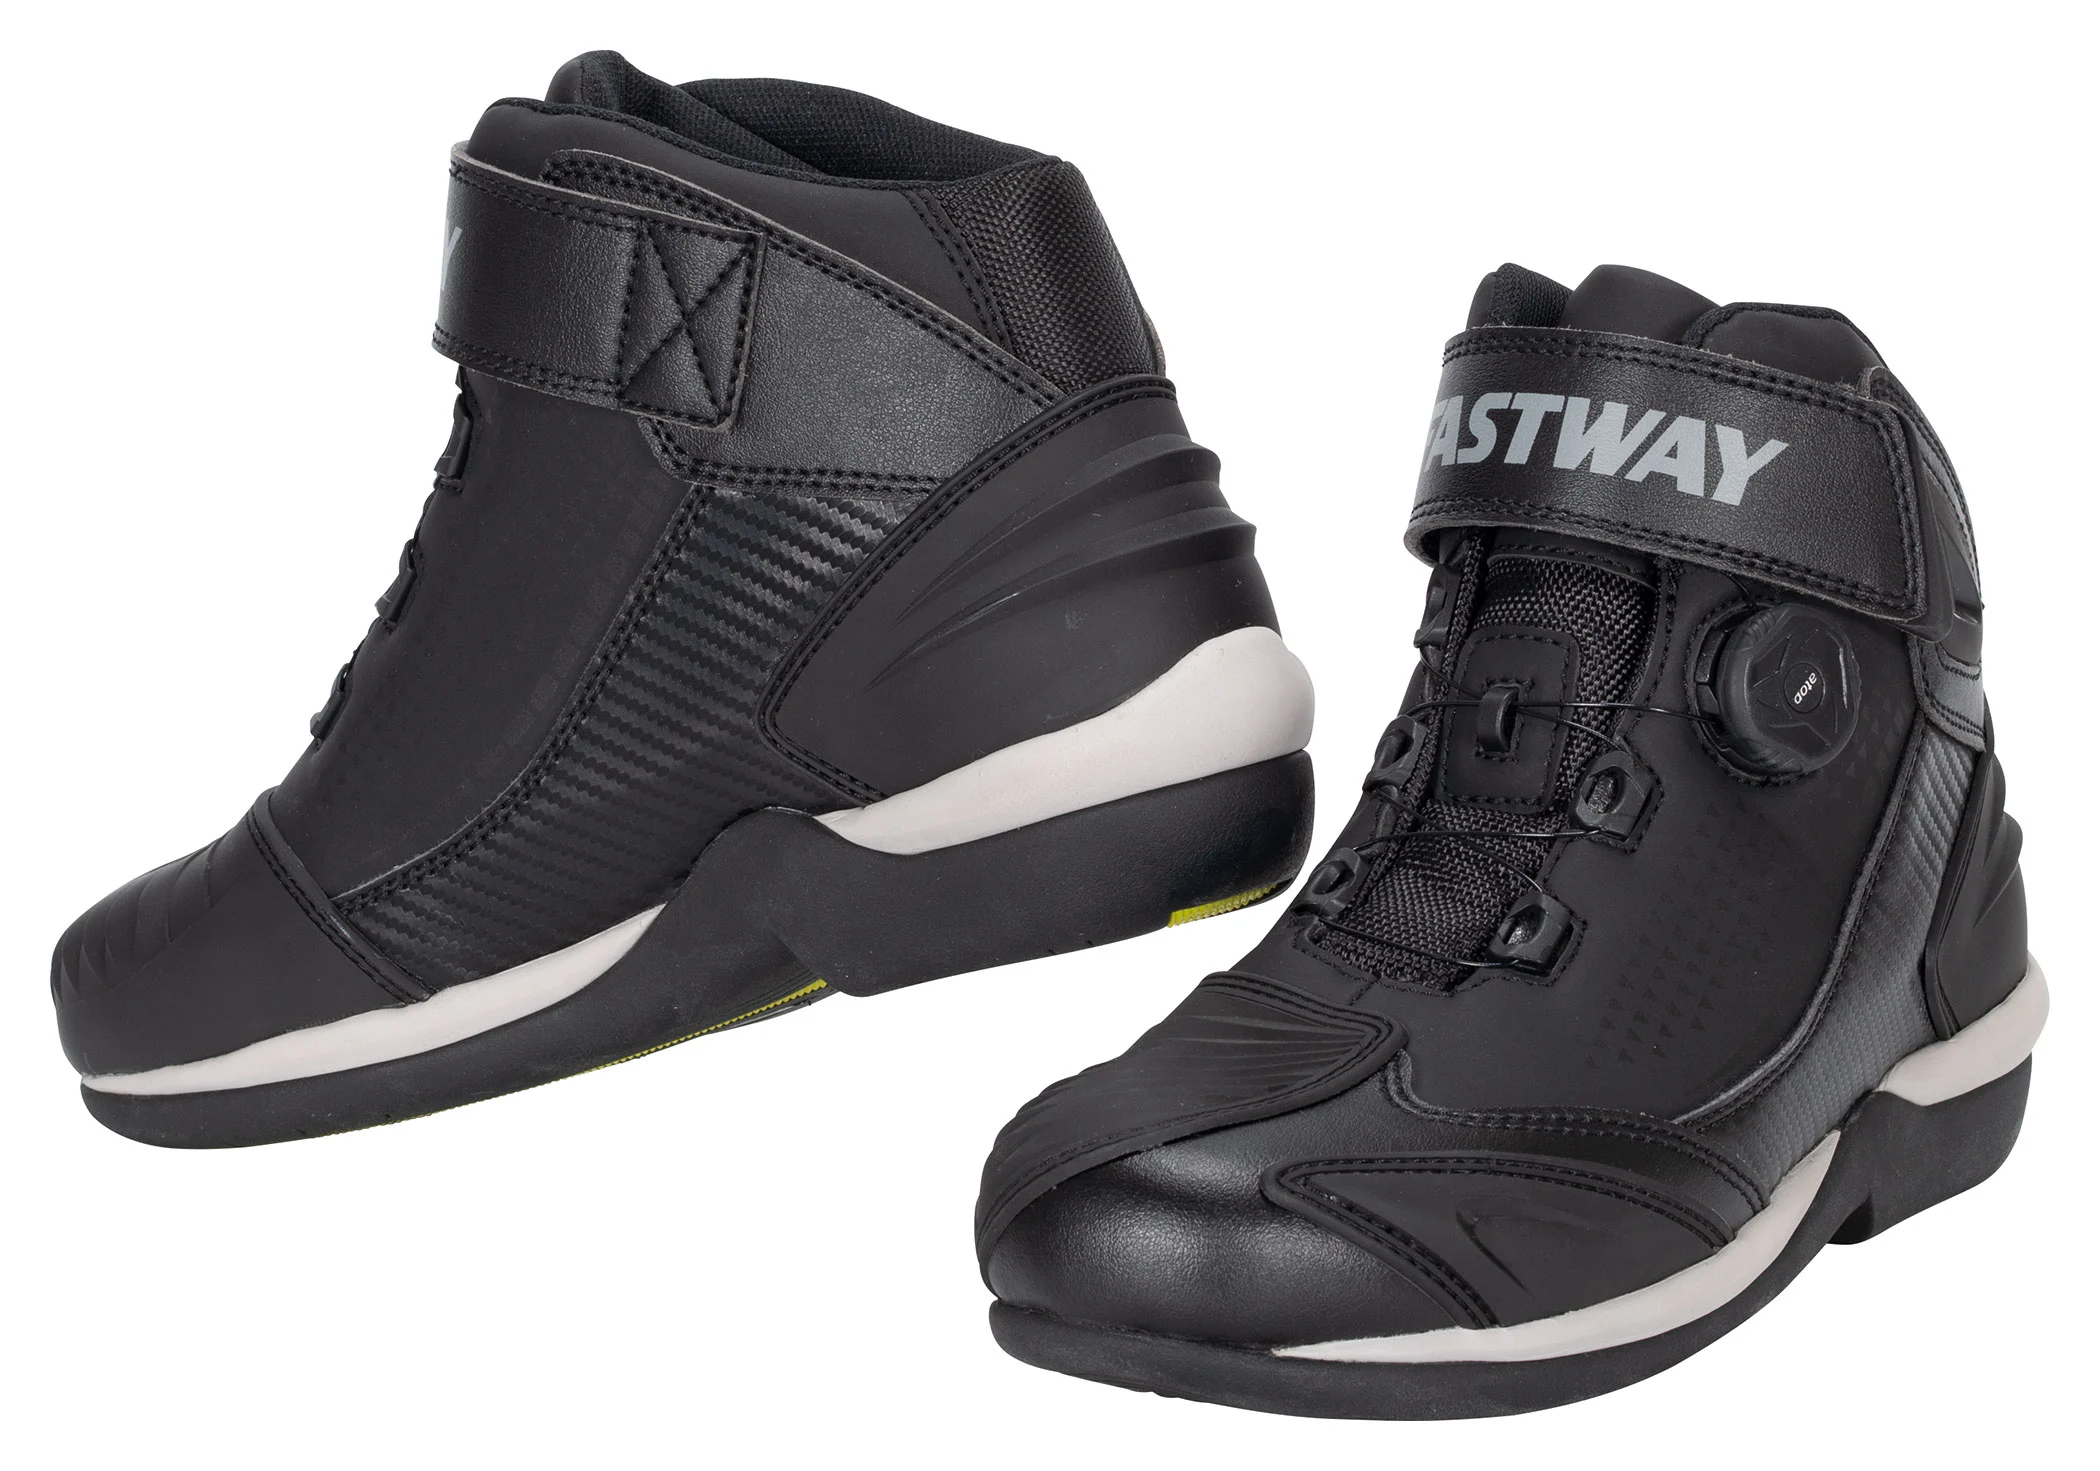 FASTWAY CITY 1 BOOTS